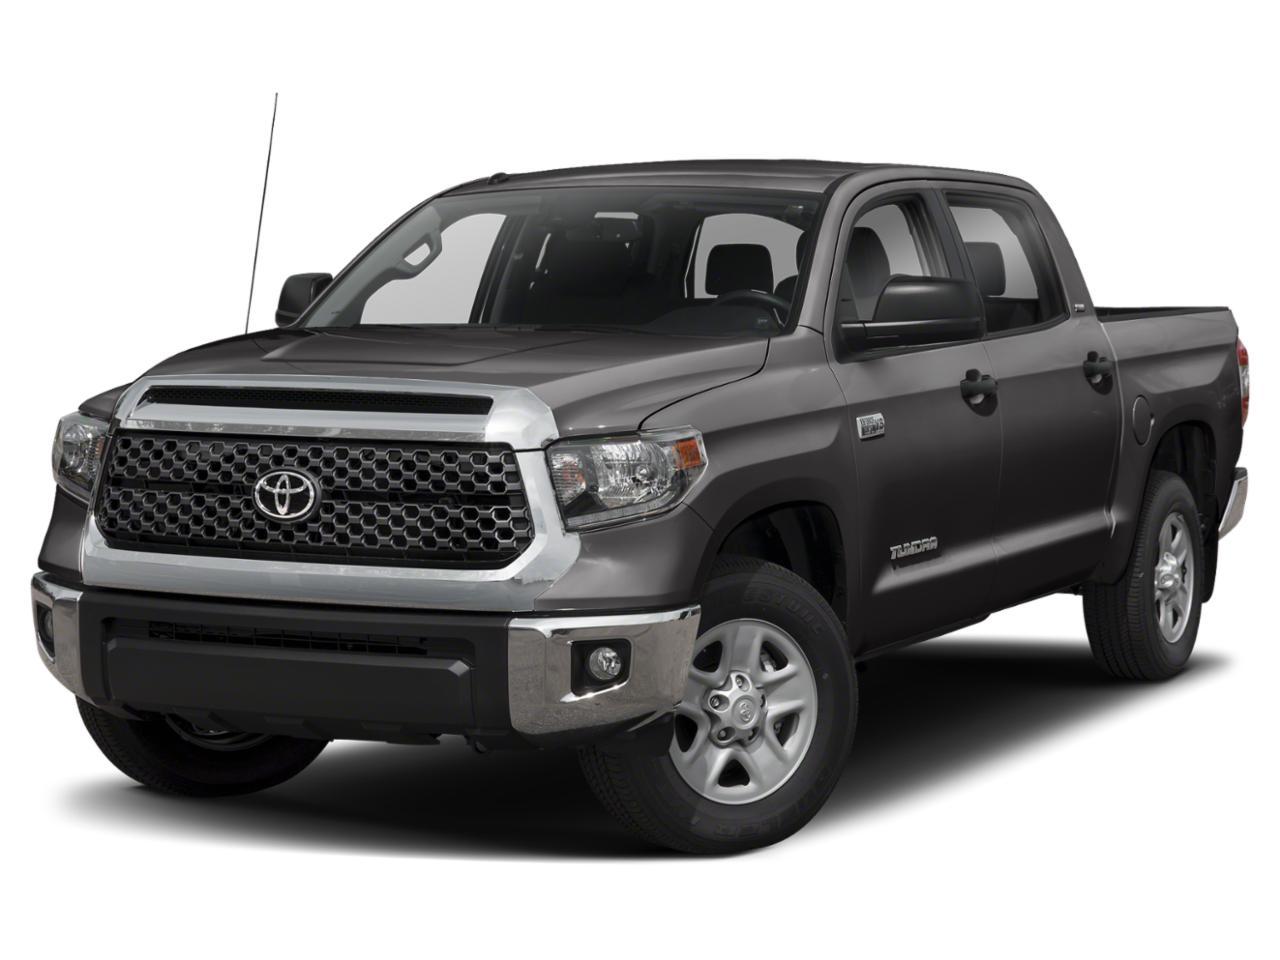 2018 Toyota Tundra 4WD Vehicle Photo in Ennis, TX 75119